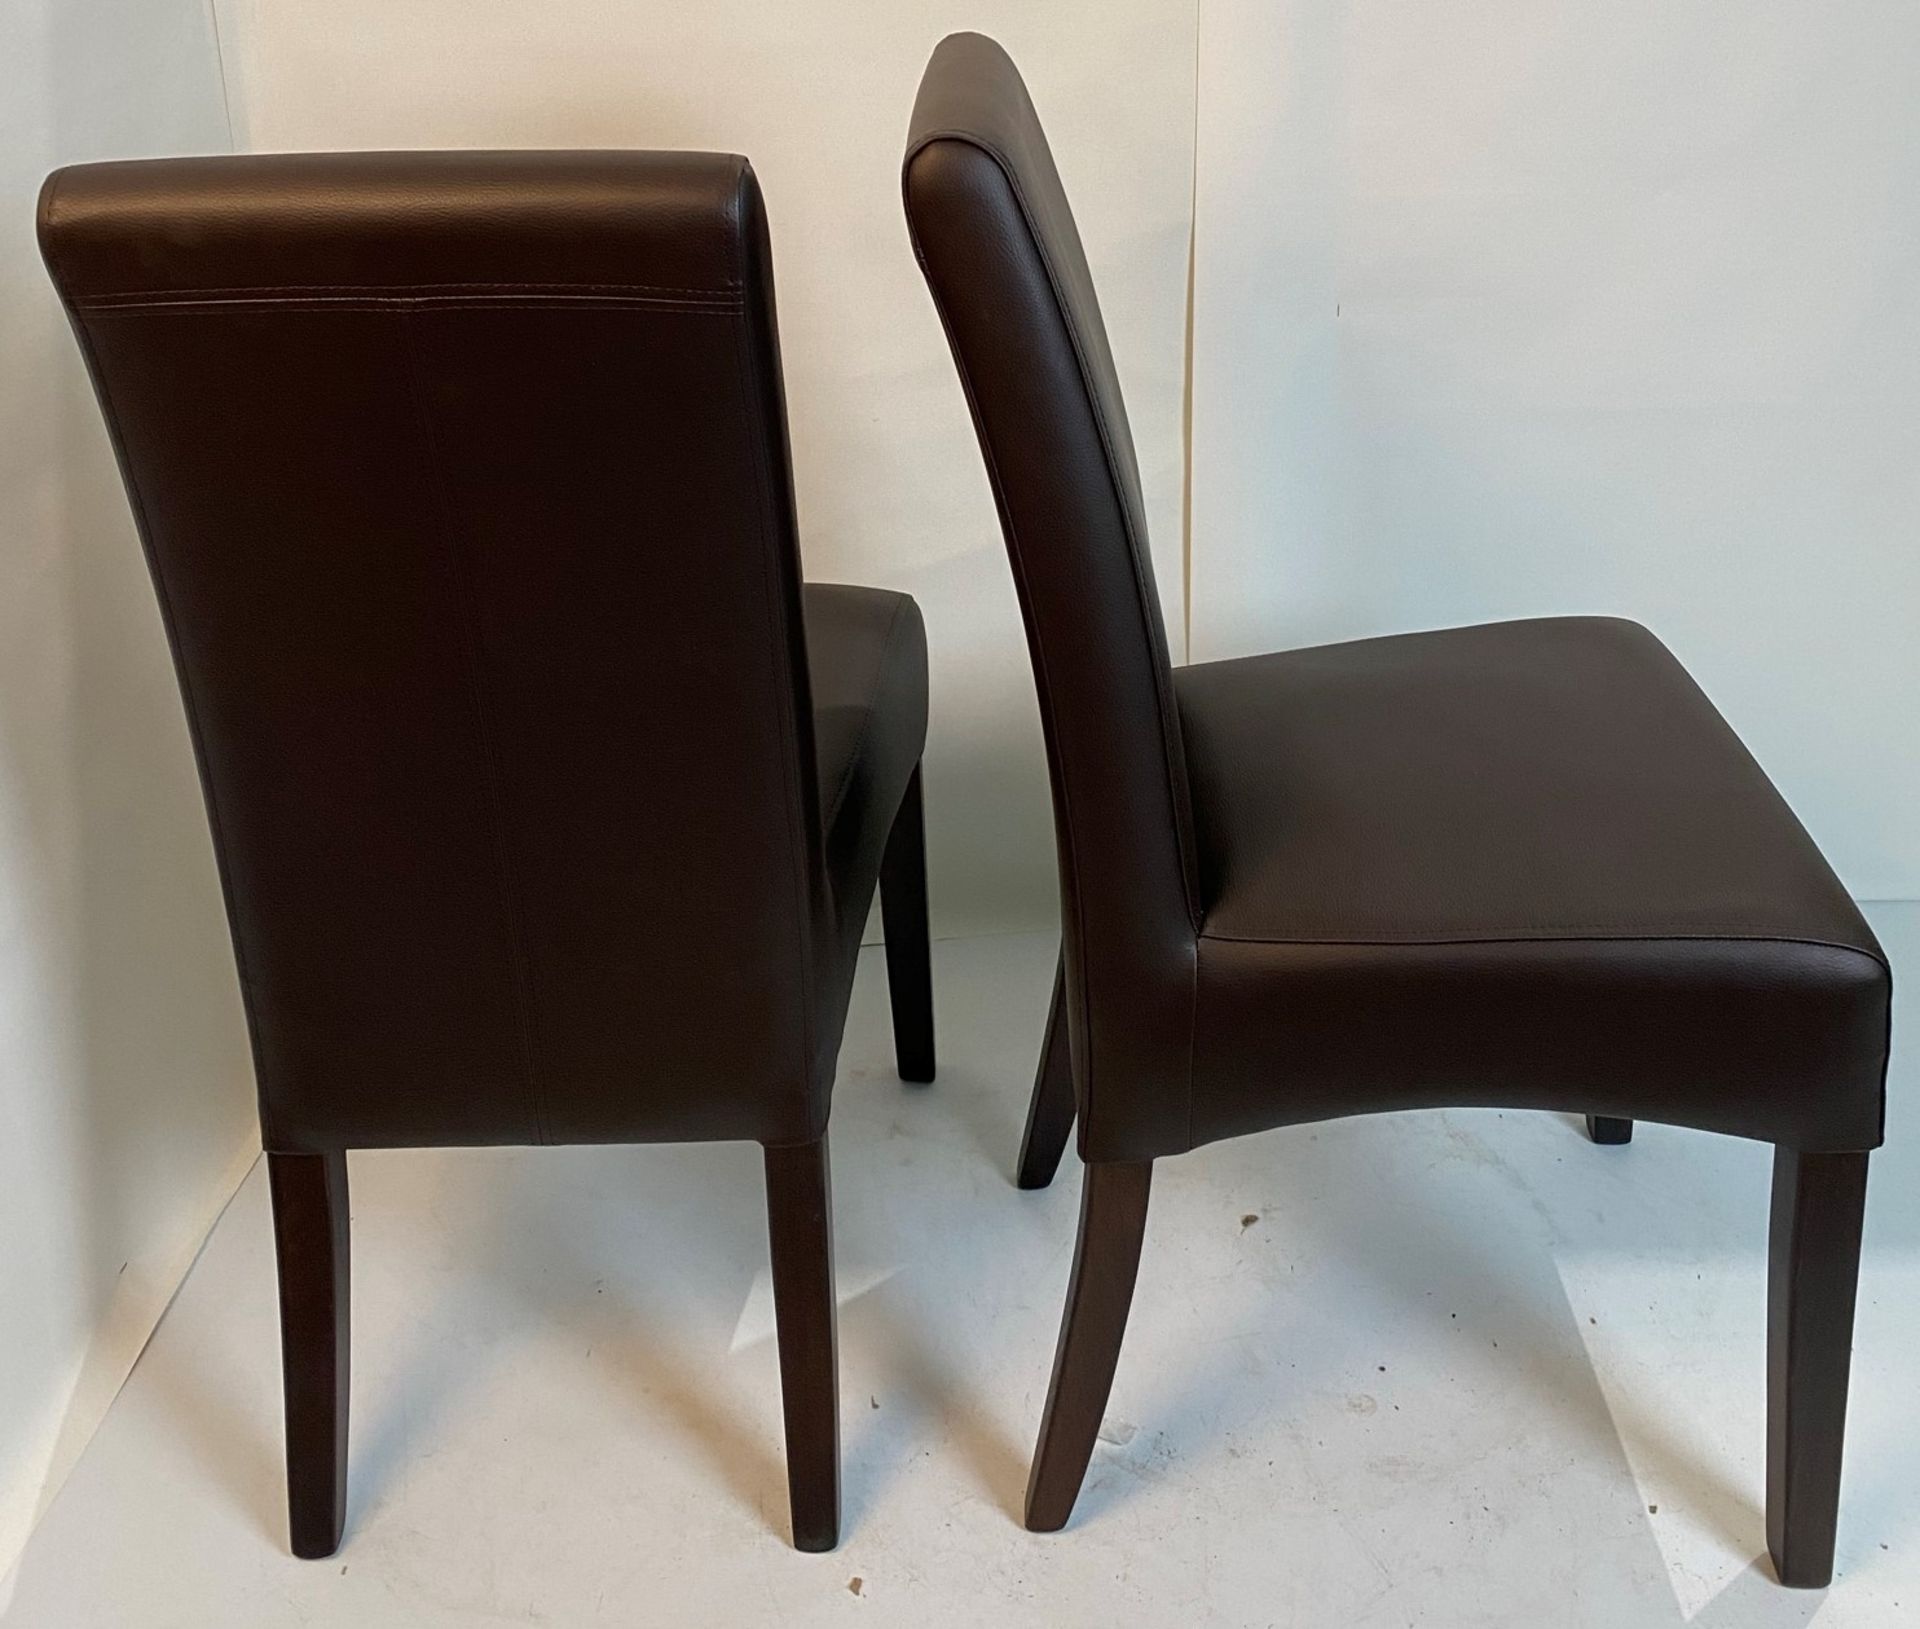 2 x Valencia Vena BR-5 Dark Brown dining/side chairs with walnut coloured frames - Image 3 of 6